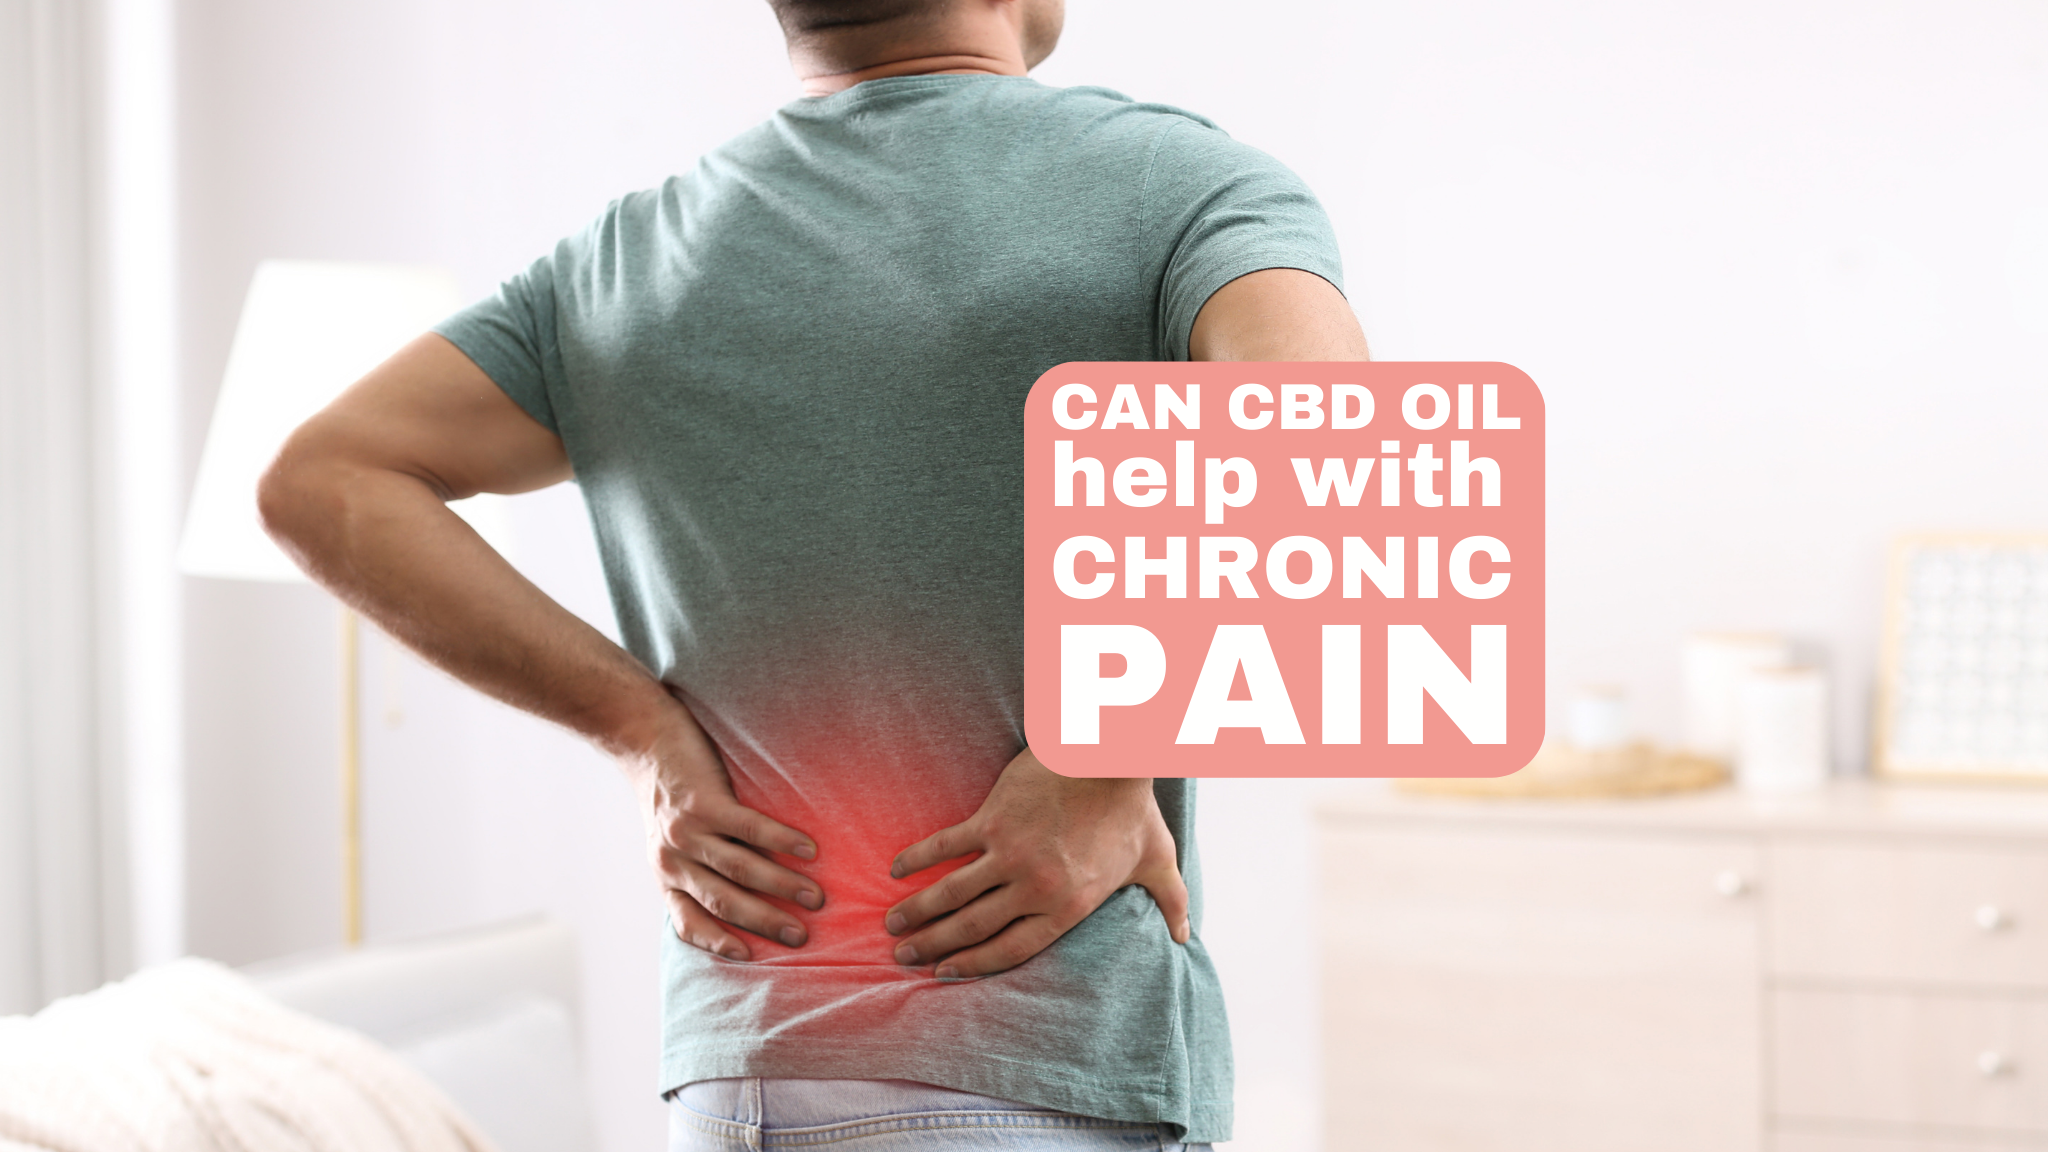 How CBD can help with chronic pain: A deep dive into the research on CBD's potential as a pain reliever and anti-inflammatory